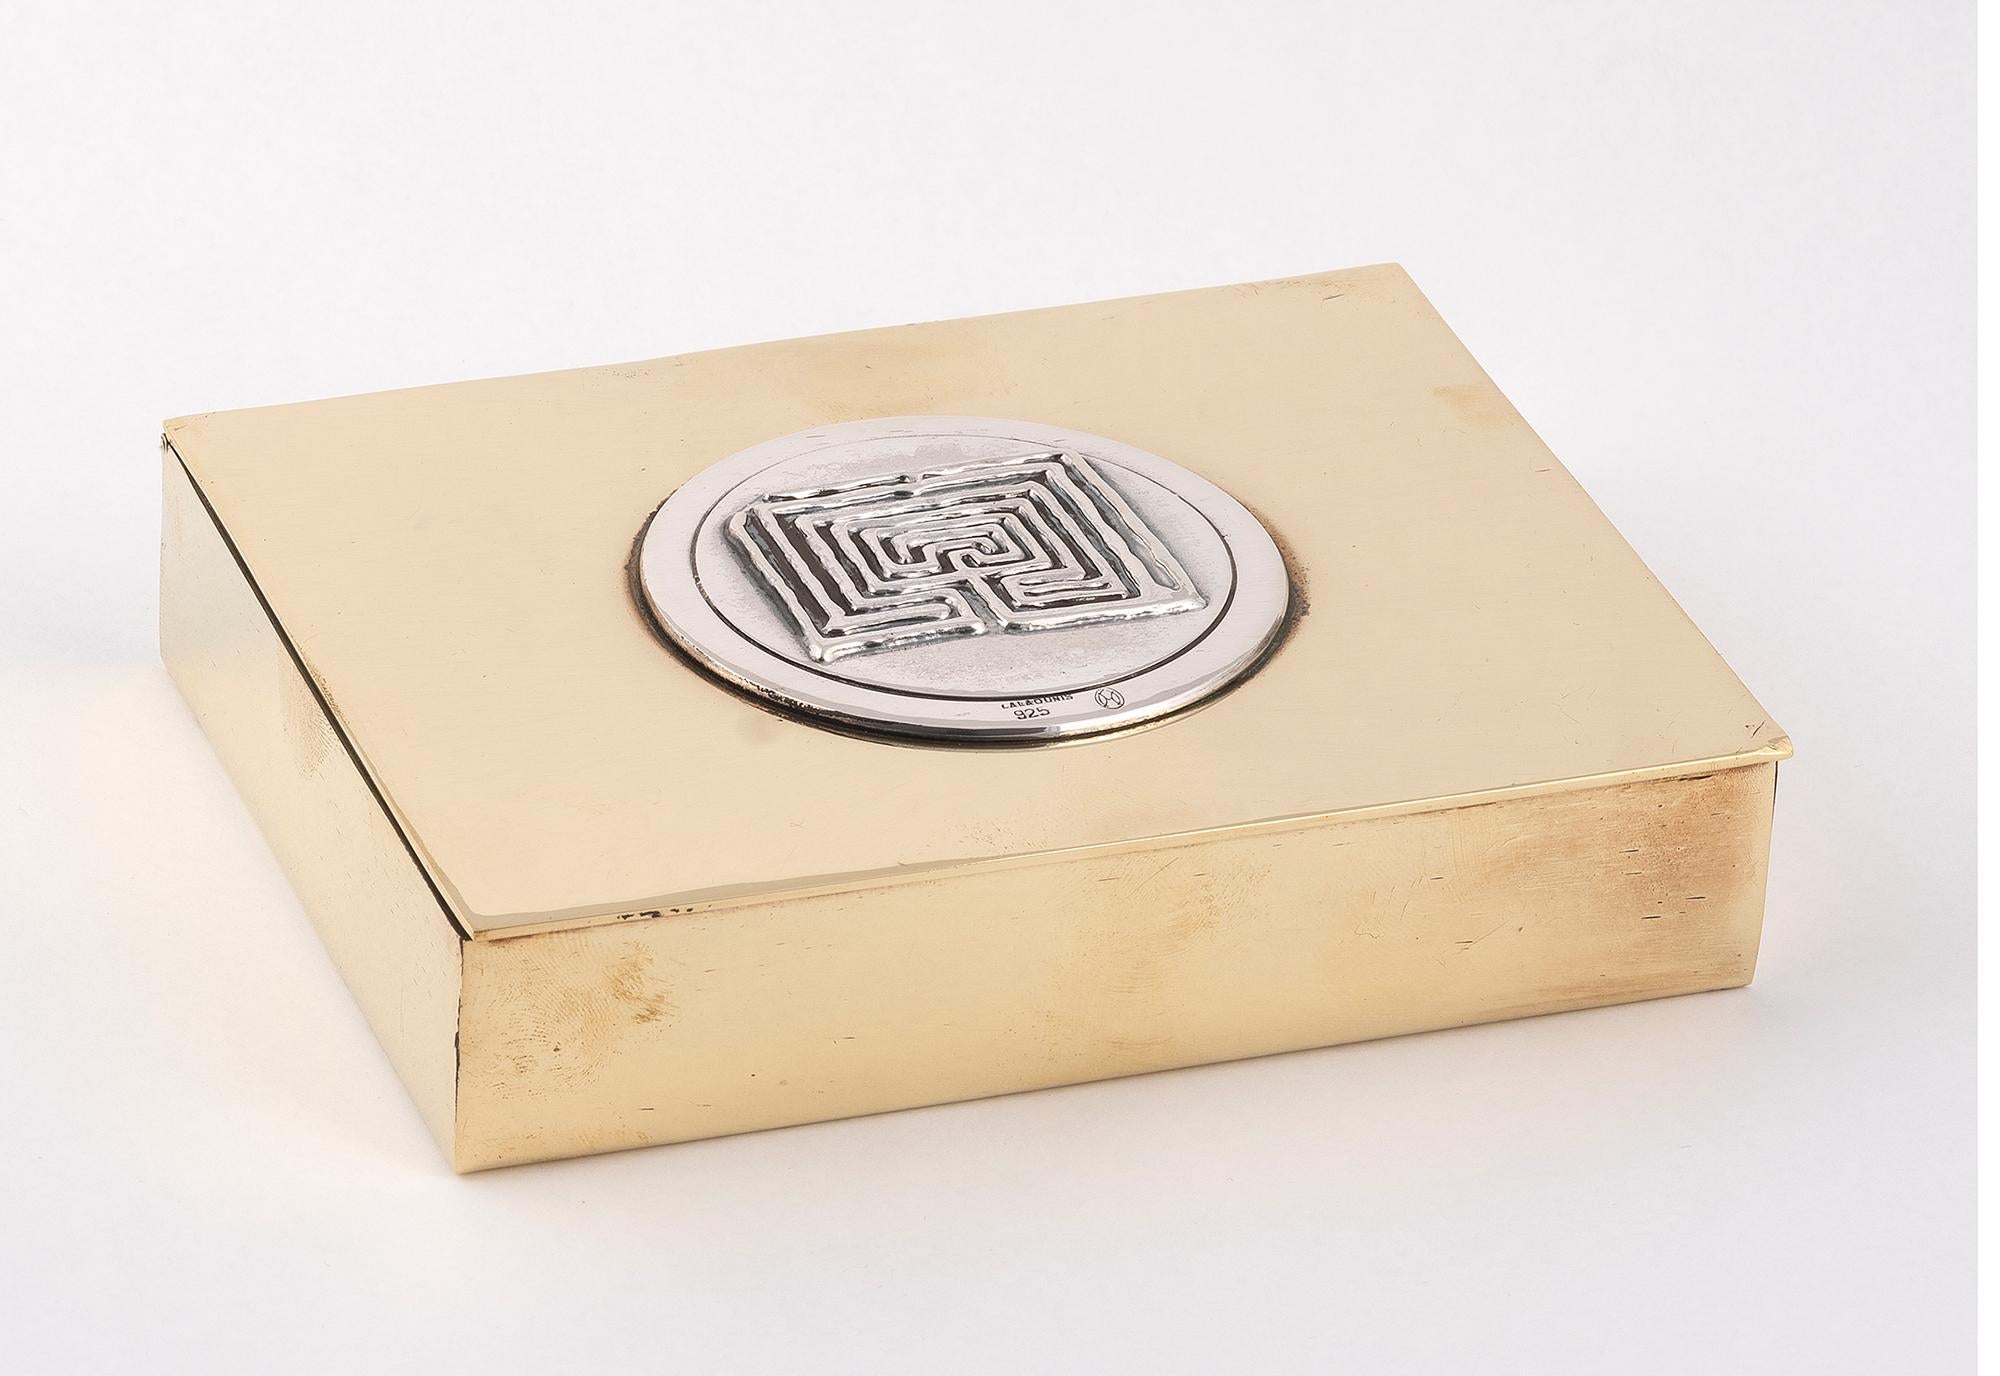 Greek Rare Labyrinth Cigarette Box by Lalaounis, Brass and Silver, 1970s For Sale